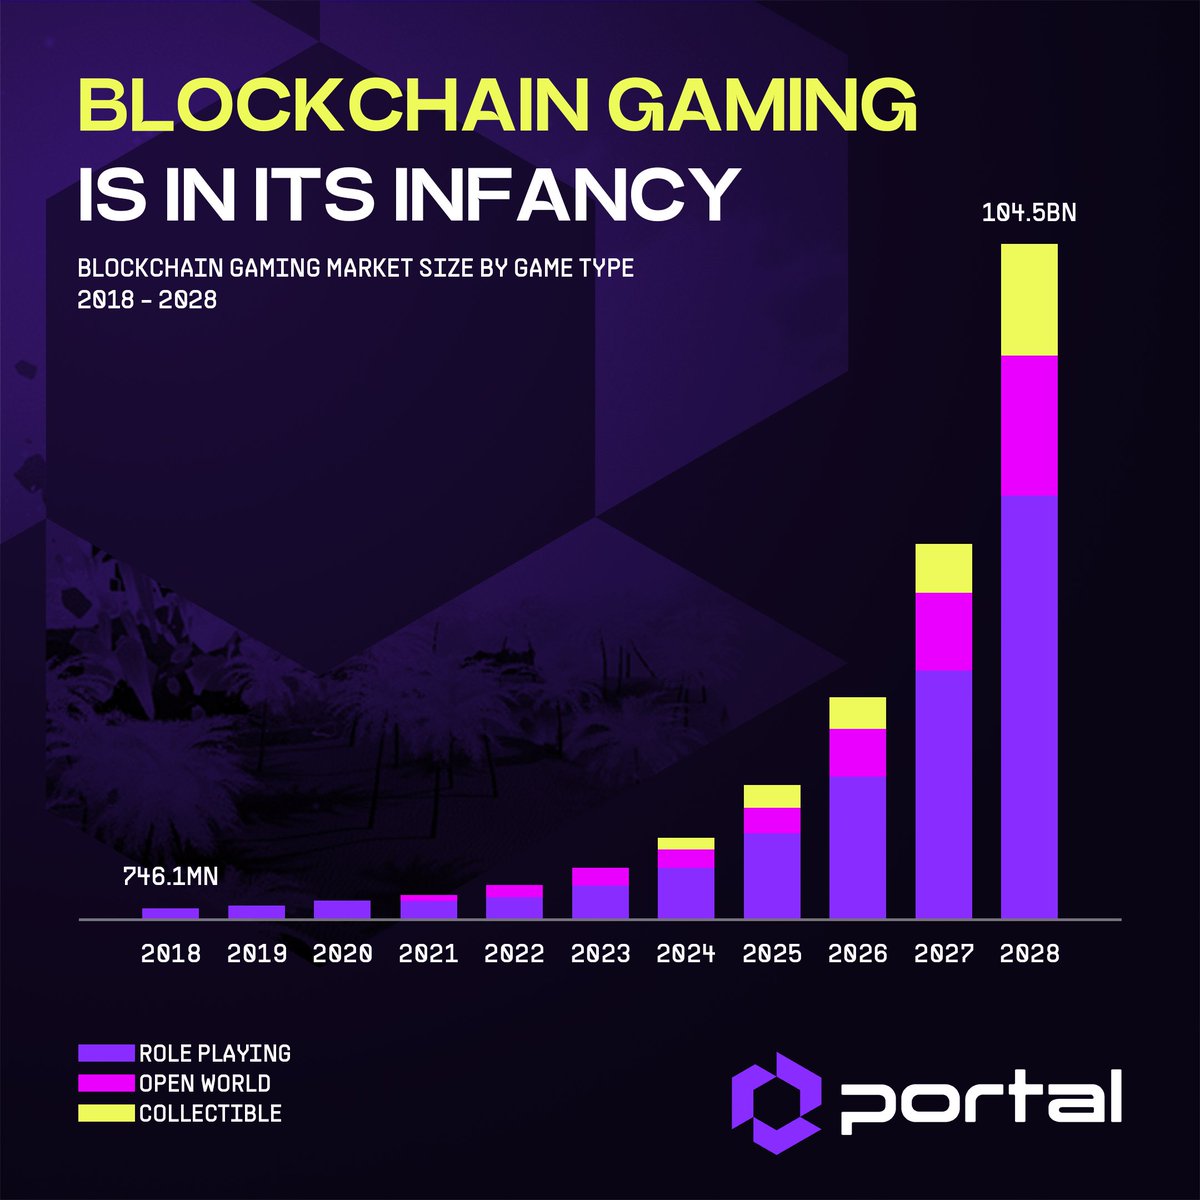 Blockchain gaming is set to nearly 100x in market size over the next 5 years. 

Portal will be at the heart of this growth cycle - by solving distribution for games & connecting Web3 IP to the mainstream, we're driving mass adoption for all.